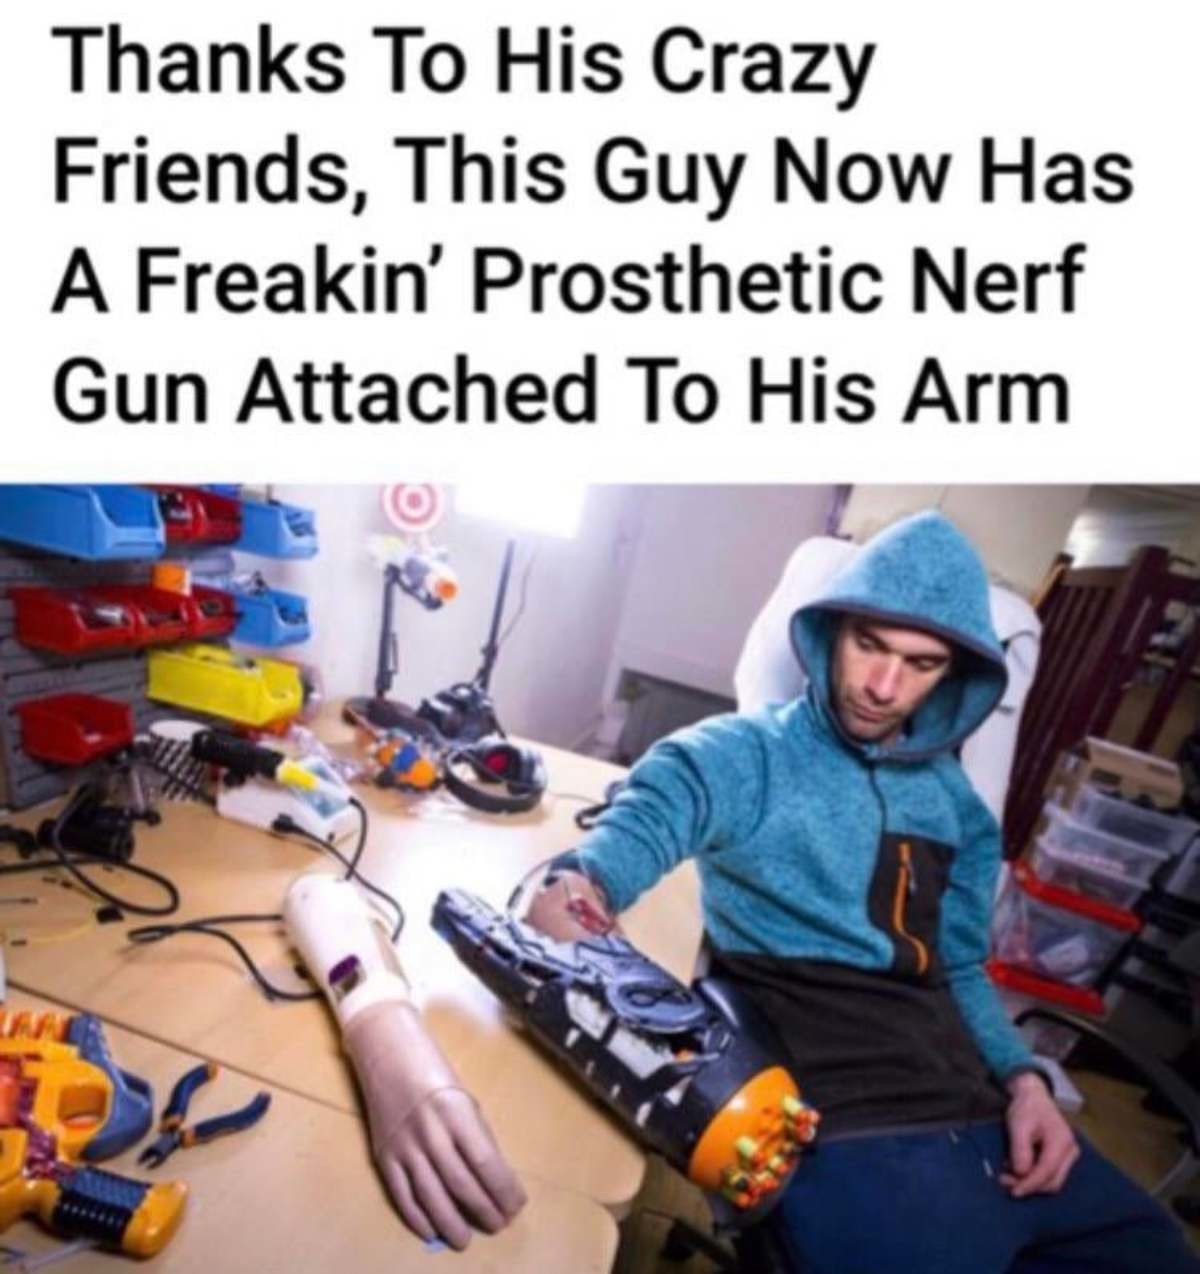 nerf gun prosthetic - Thanks To His Crazy Friends, This Guy Now Has A Freakin' Prosthetic Nerf Gun Attached To His Arm